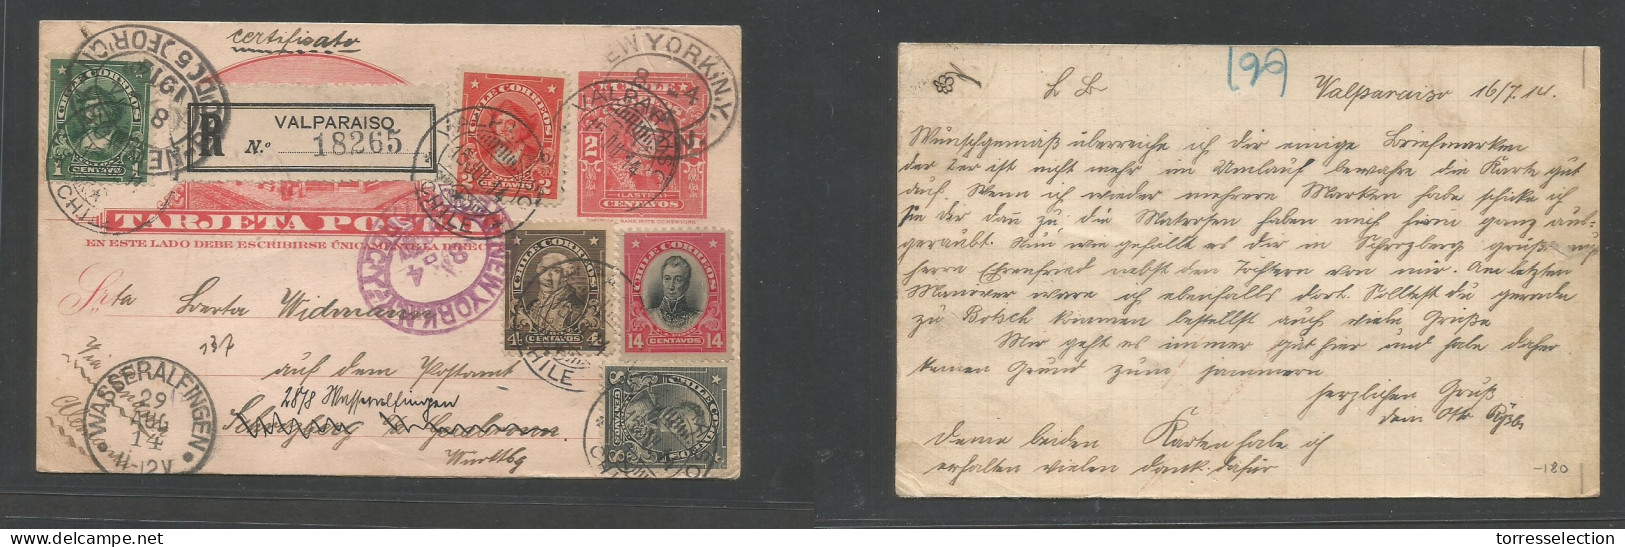 CHILE - Stationery. 1914 (16 July) Valparaiso - Germany, Wasseralfingen (29 Aug) Registered 2c Red Illustrated Stationar - Cile